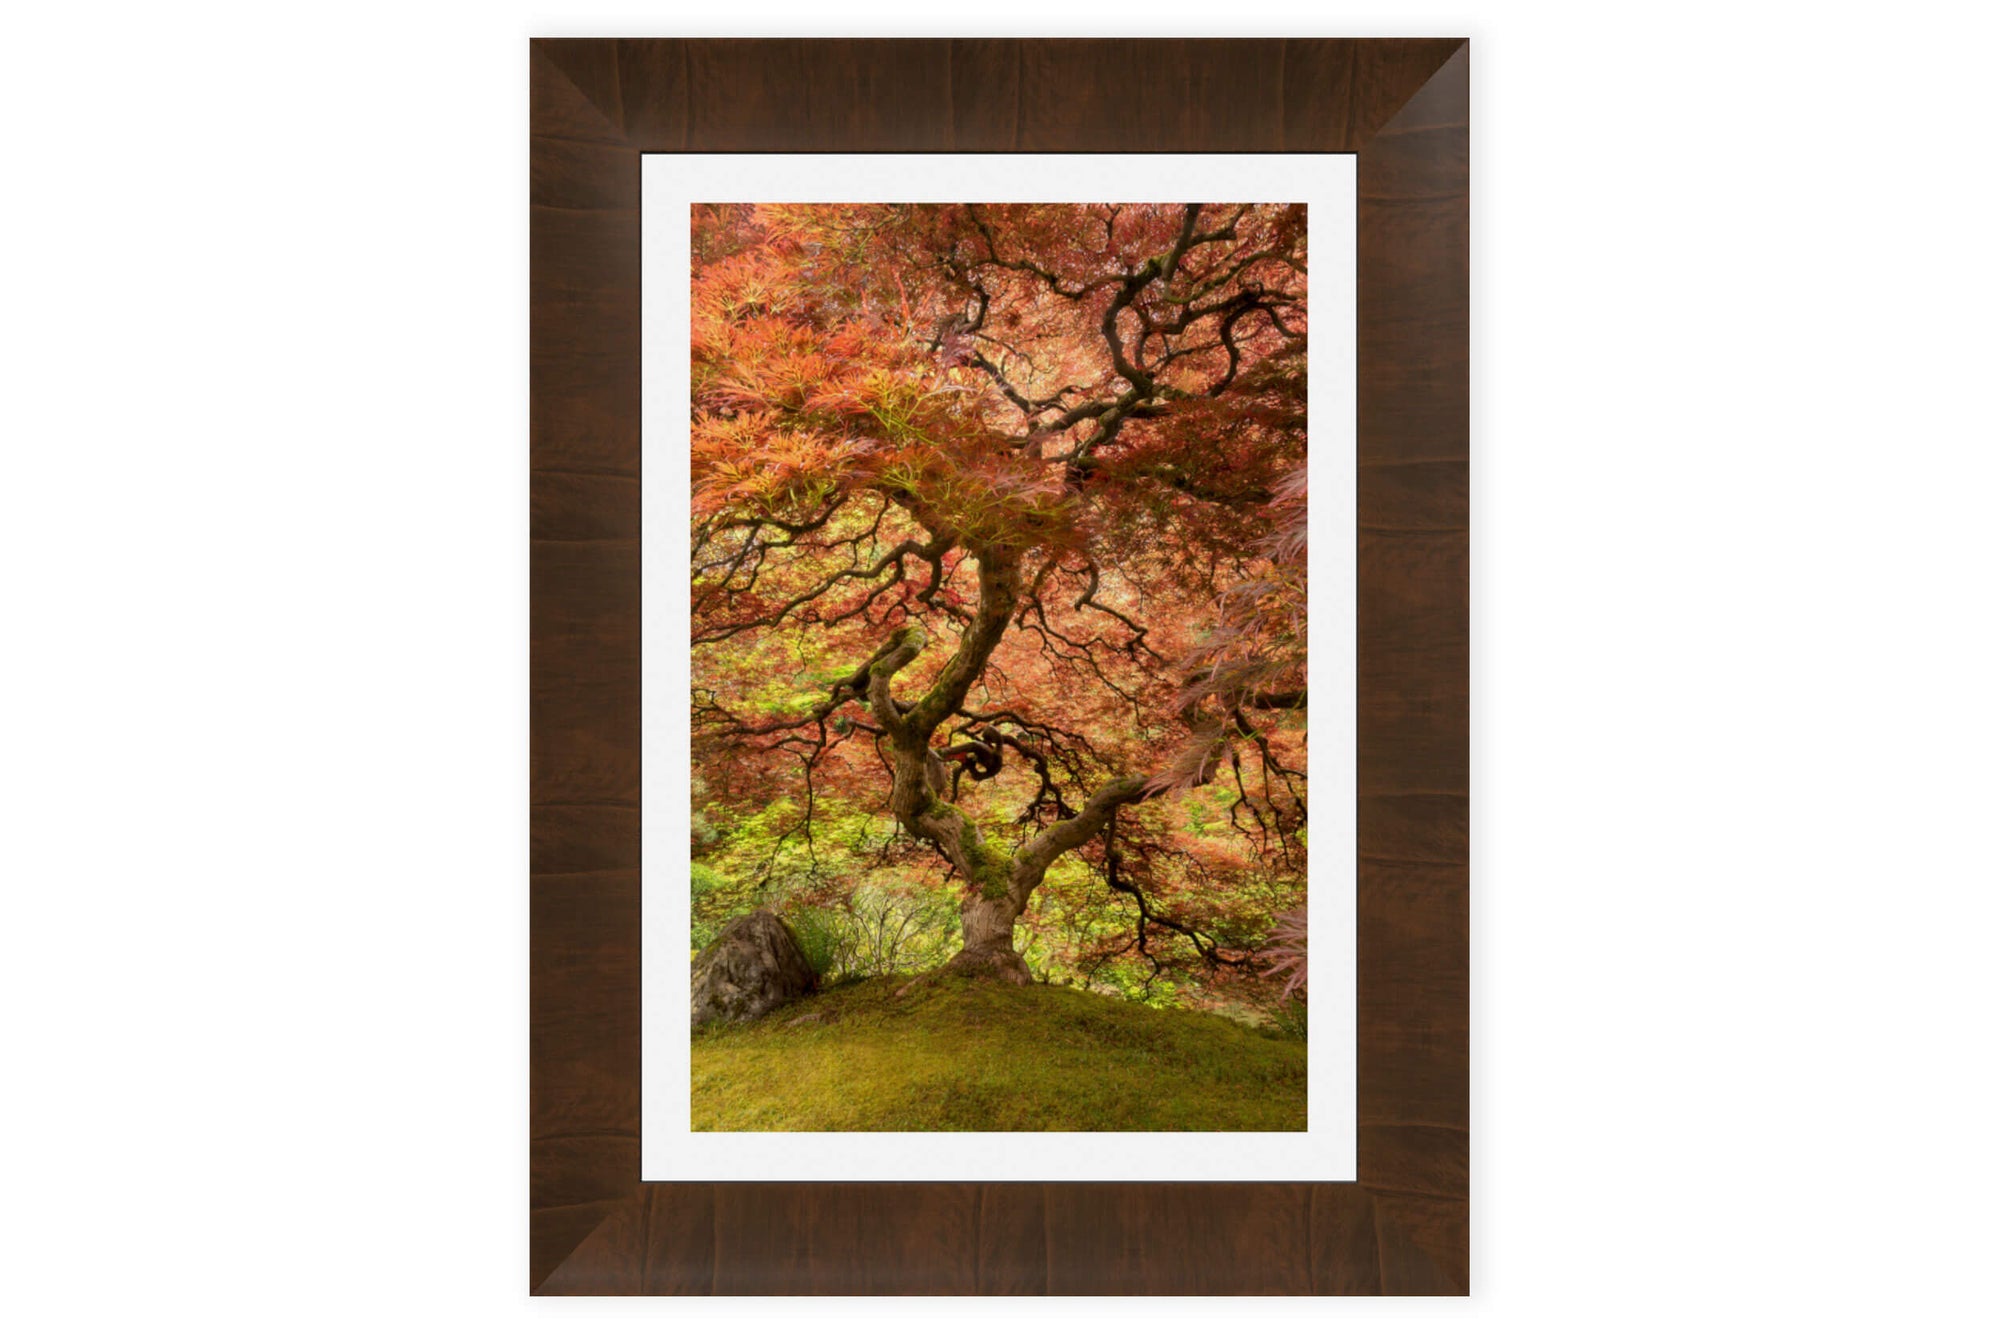 This piece of framed Japanese Garden art shows a maple tree.